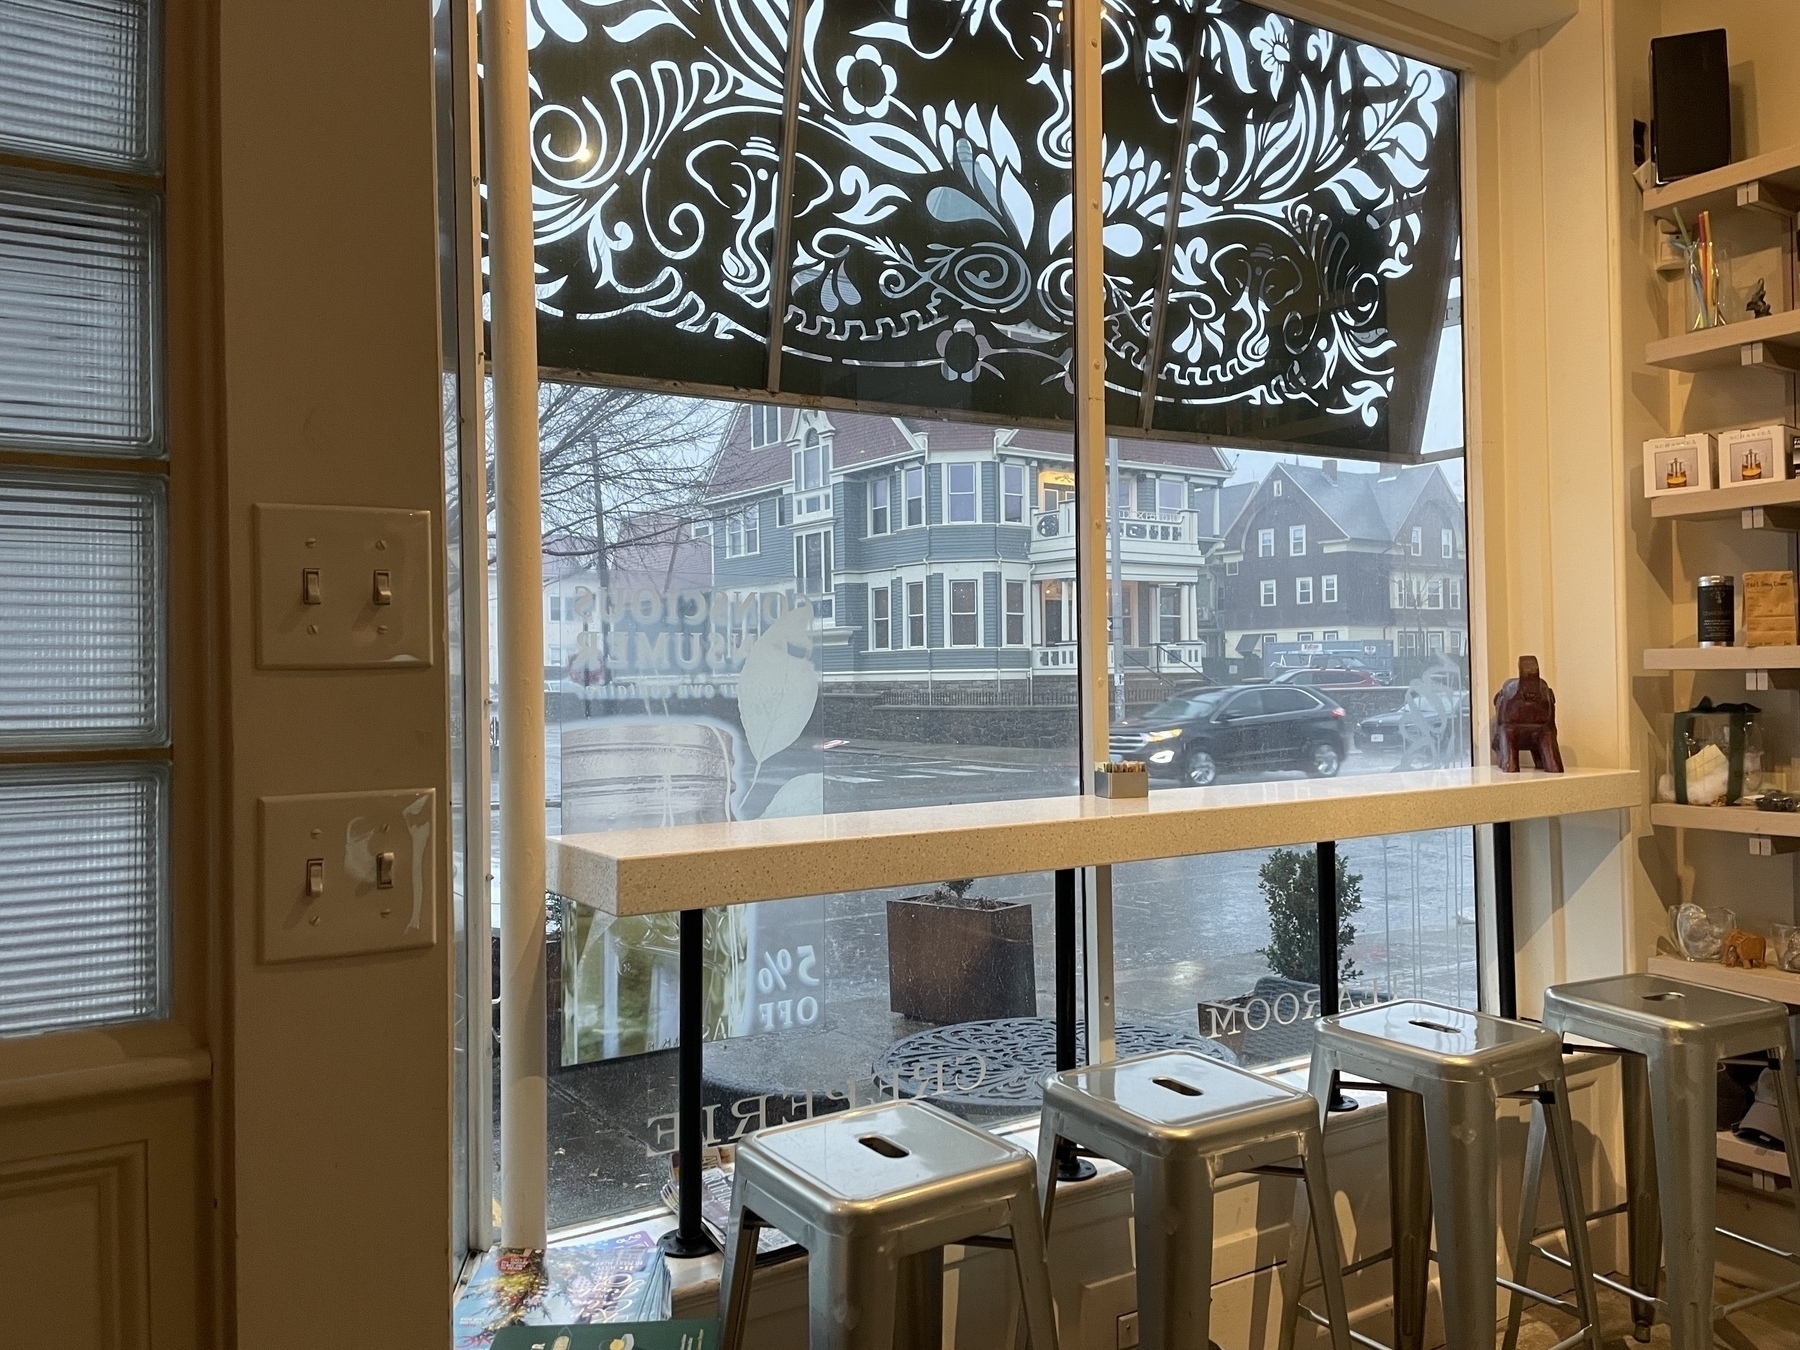 Looking outside from in, a row of stools beneath a shelf at a window with a metal lace awning. Outside, the street, car and houses are being drenched in driven rain. 